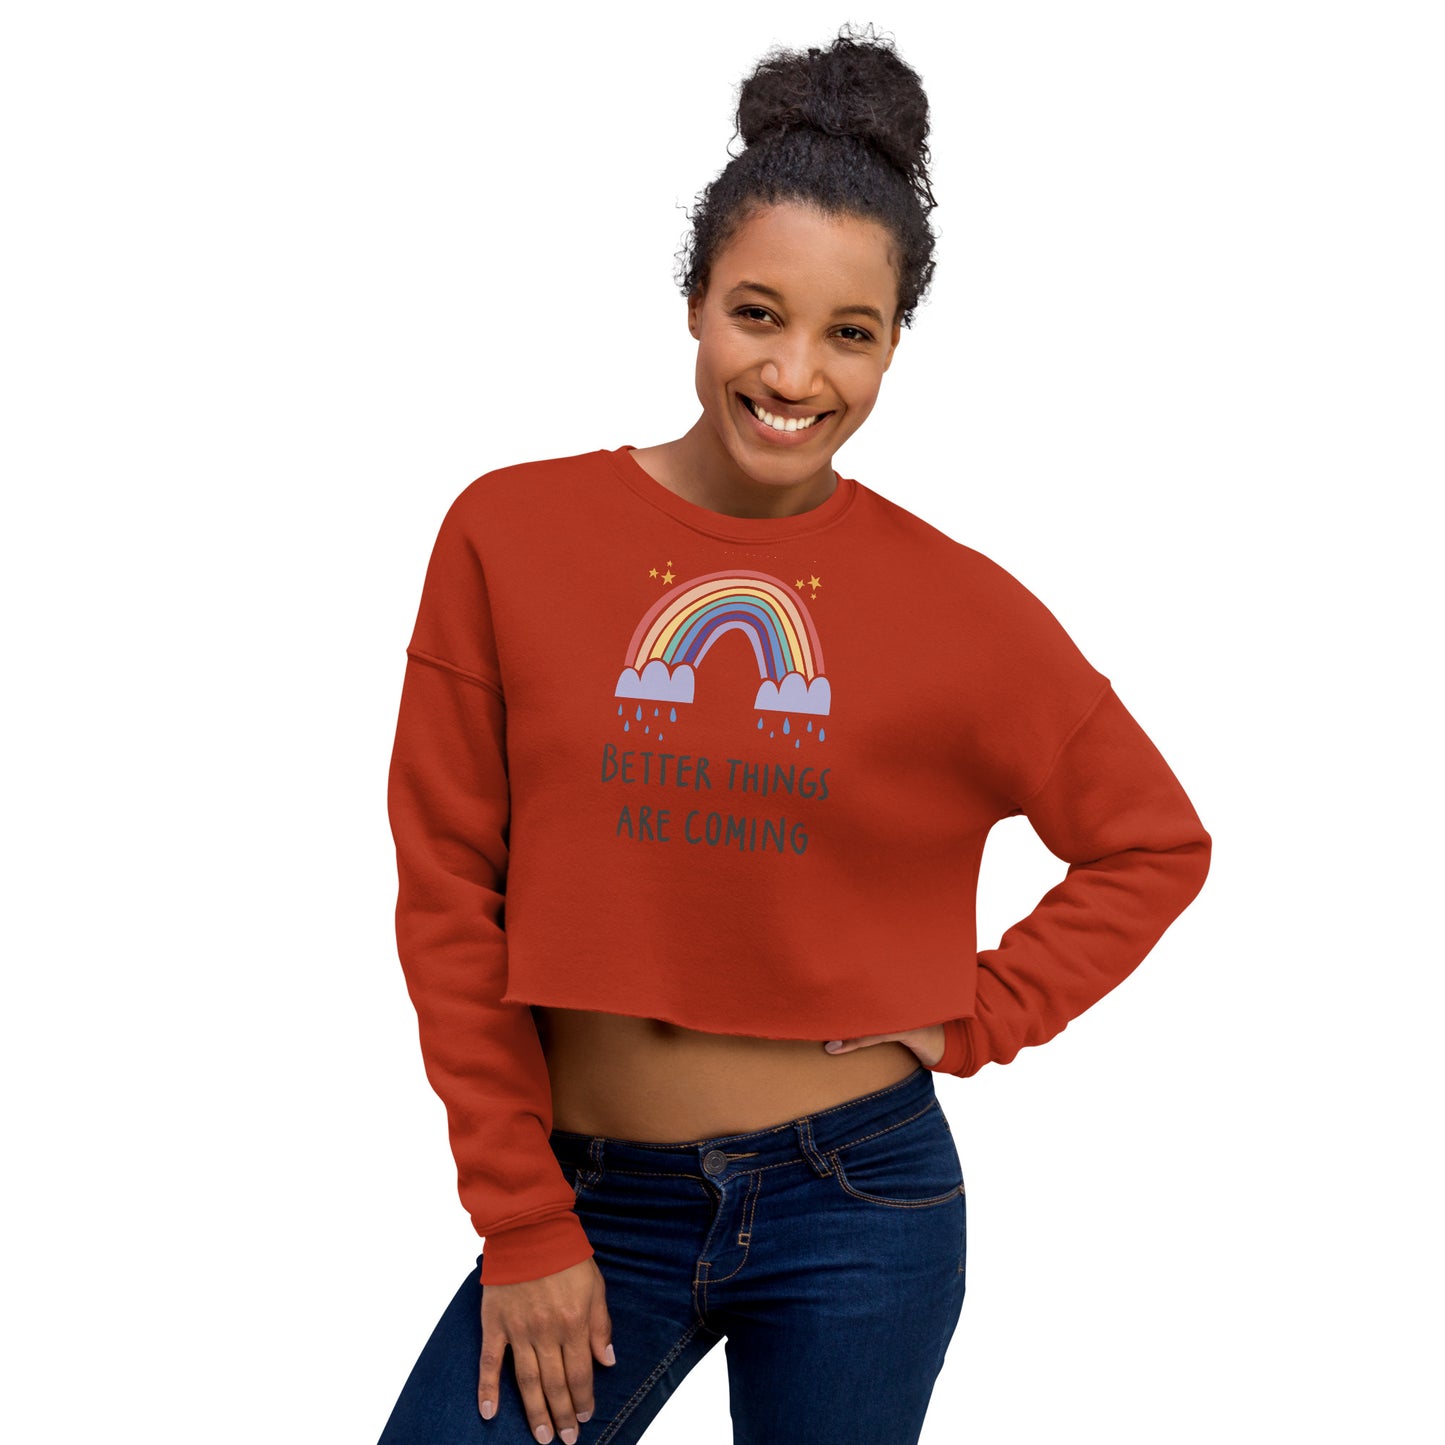 Crop Sweatshirt Womens (Better Things Are Coming- Inspiration 007)